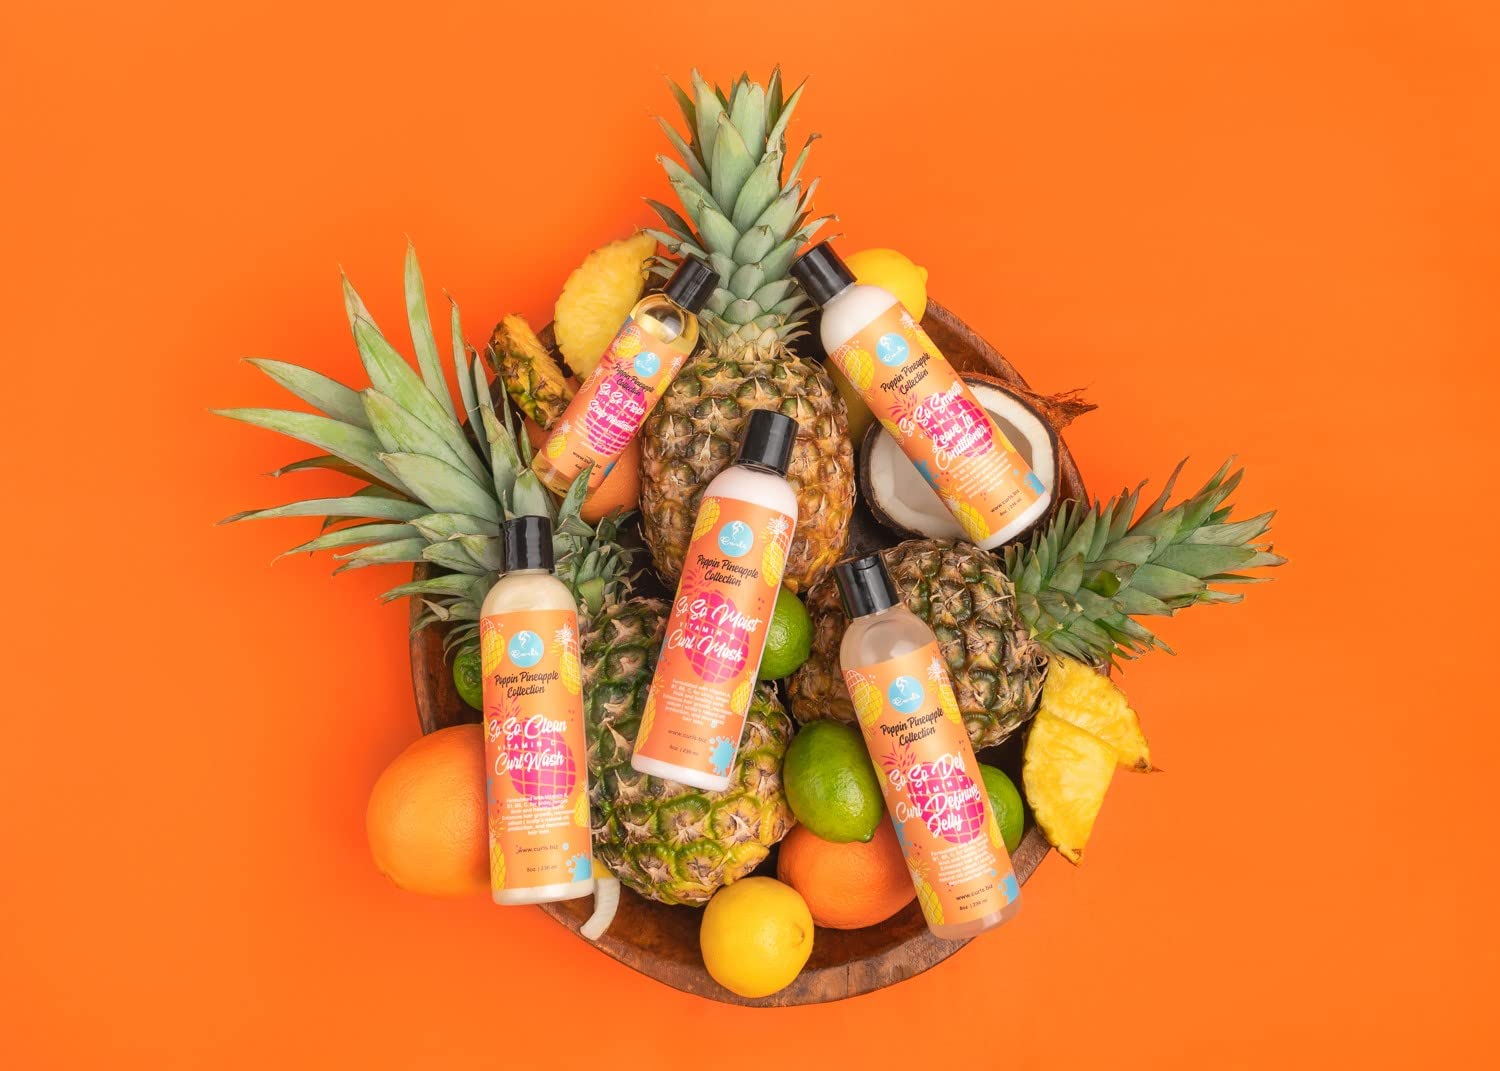 Curls Poppin Pineapple So So Smooth Vitamin C Leave In Conditioner- For Shiny, Longer, Thick & Healthy Hair - Protein Free Formula - For All Types, 8 Ounces